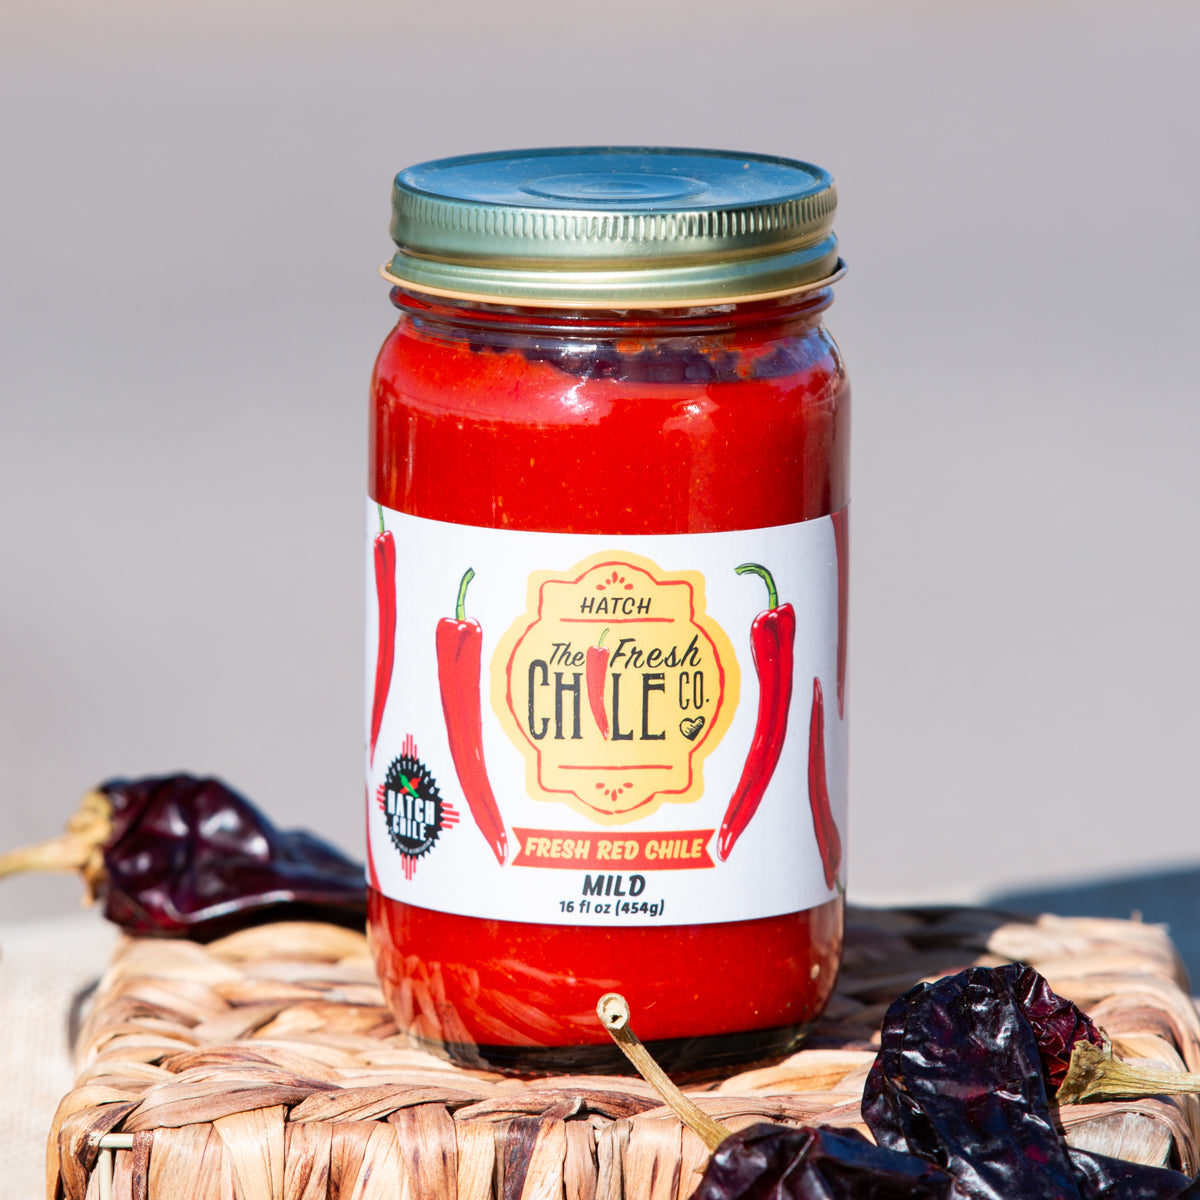 A jar of Medium Sampler from The Fresh Chile Co., mild, displayed on a woven mat with dried chiles around, against a neutral background.